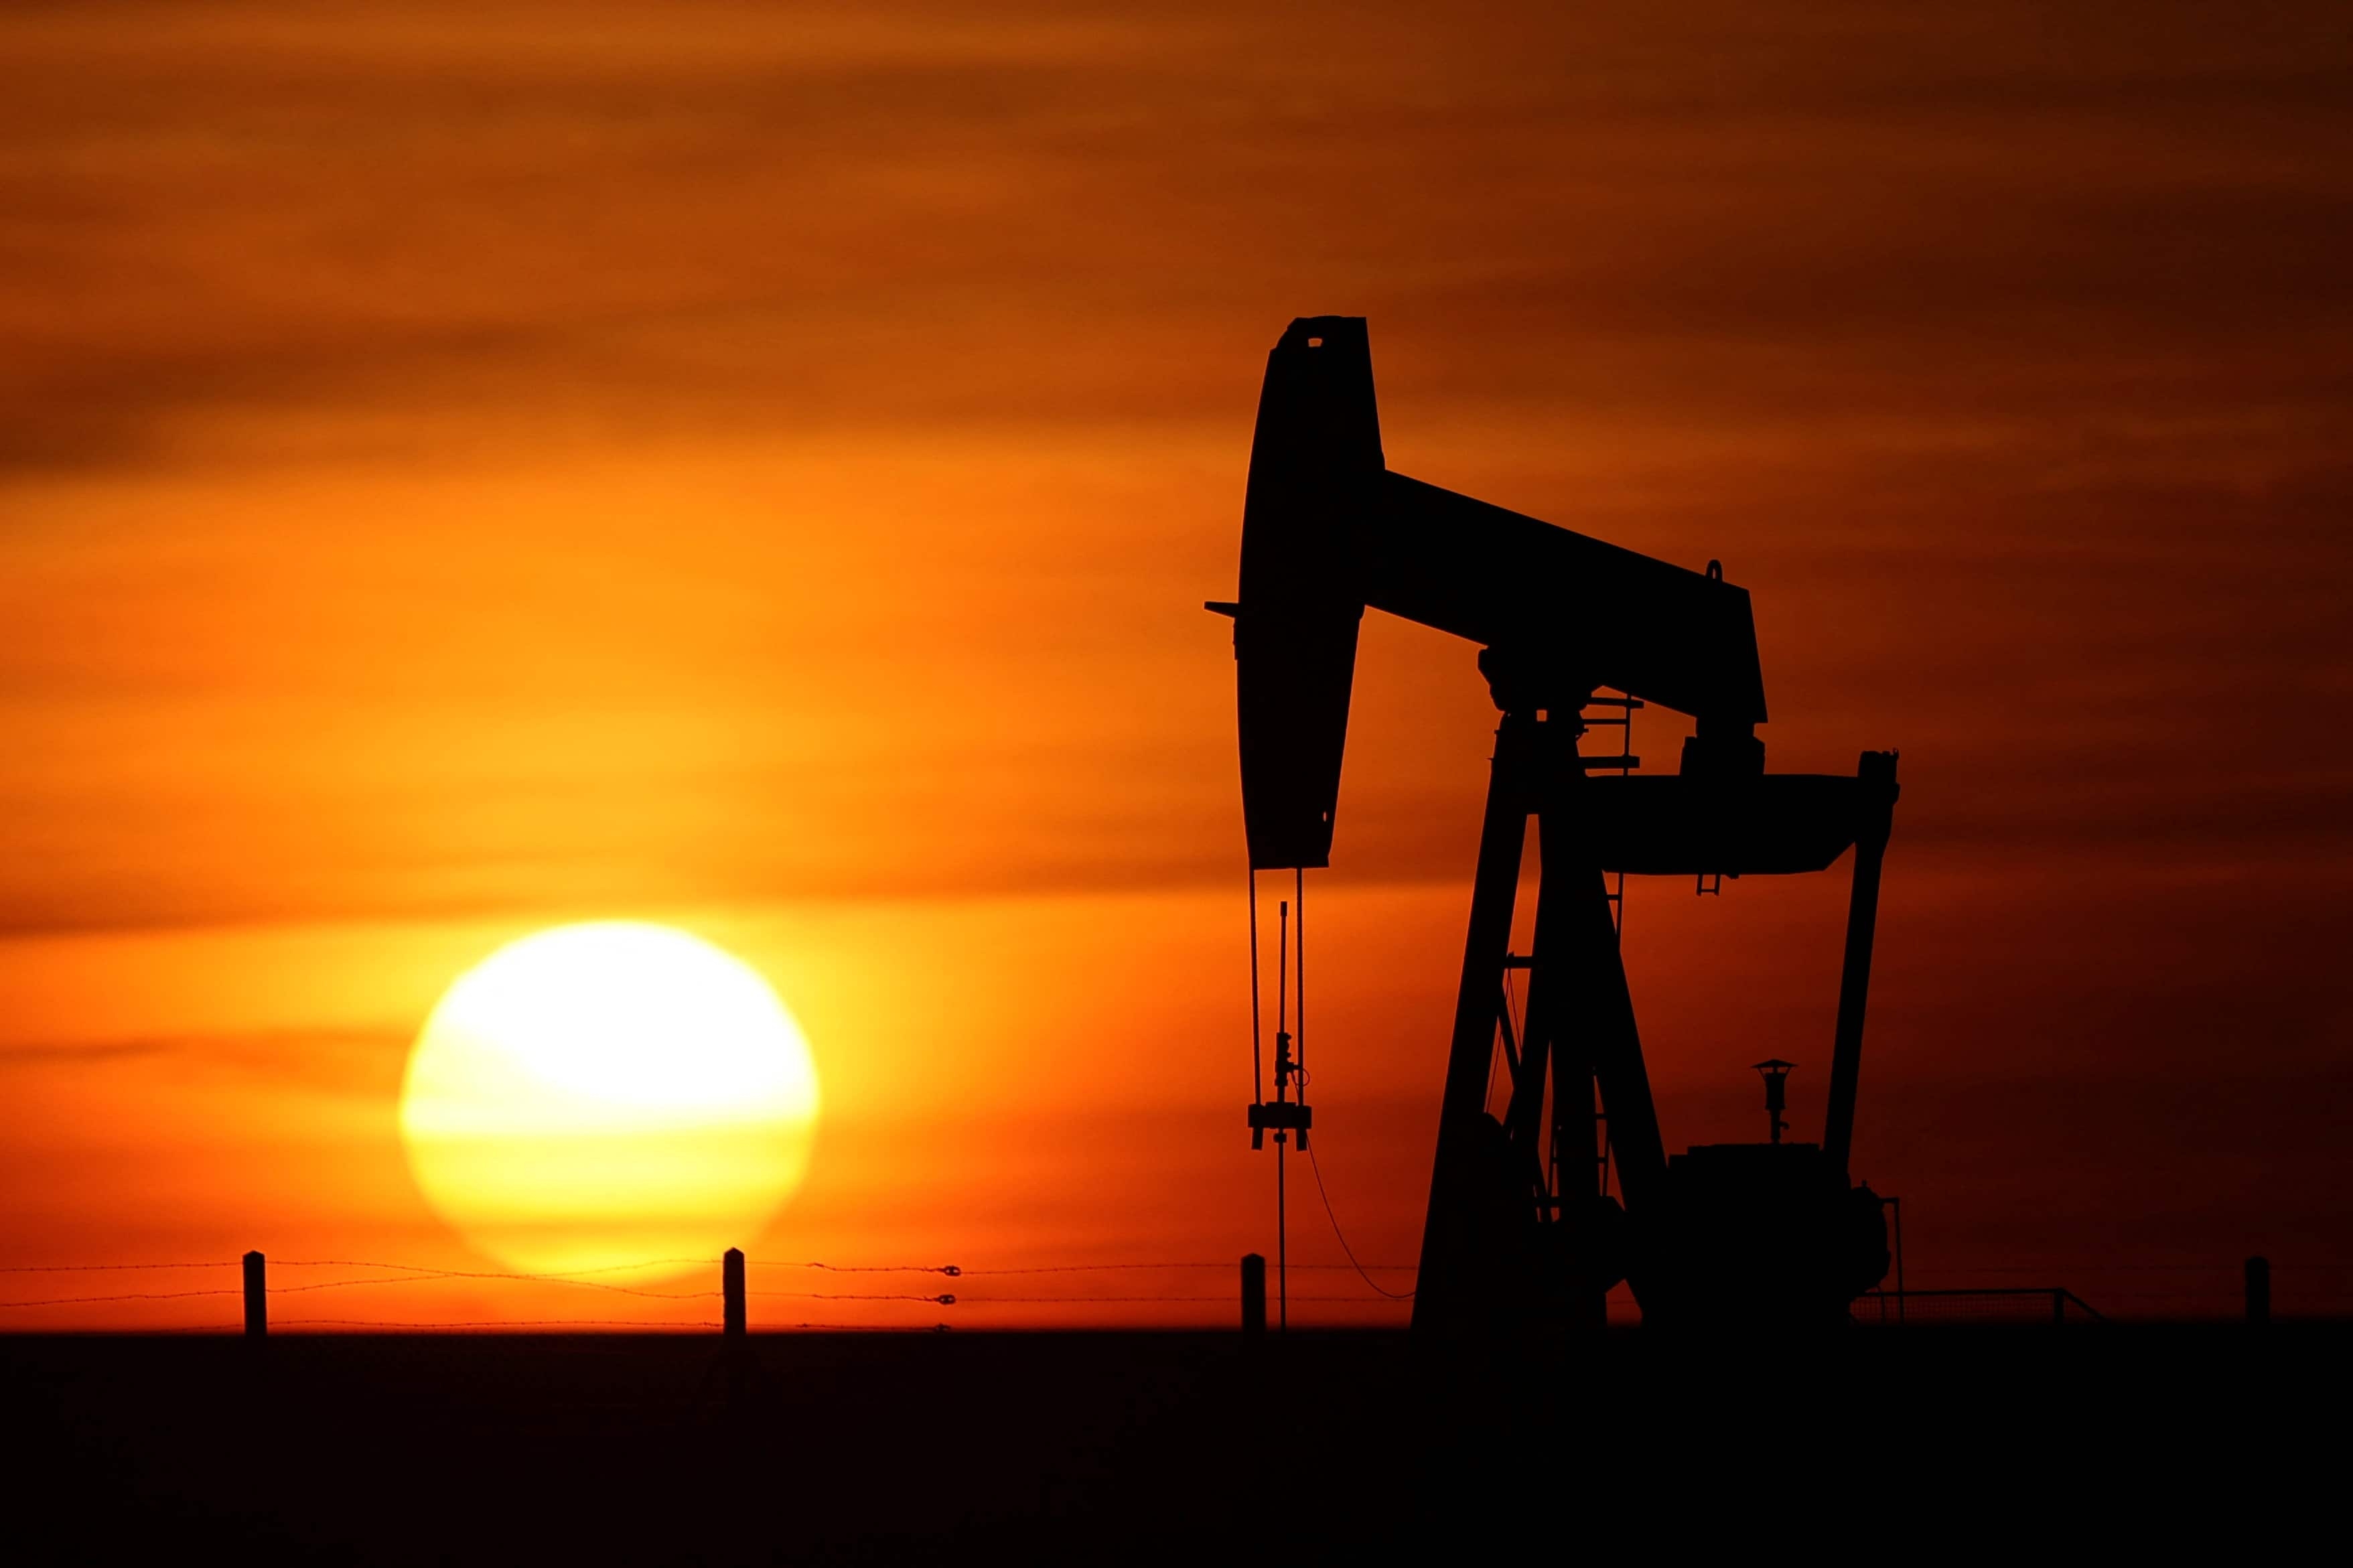 Oil prices settled about 2% lower on Thursday after a volatile session, a day after its biggest daily dive in two years, as Russia pledged to fulfill contractual obligations and some traders said supply disruption concerns were overdone. Brent futures fell $1.81, or 1.6%, to settle at $109.33 a barrel after gaining as much as 6.5% earlier in the session. US West Texas Intermediate (WTI) crude fell $2.68, or 2.5%, to settle at $106.02 a barrel, giving up over 5.7% of intraday gains.